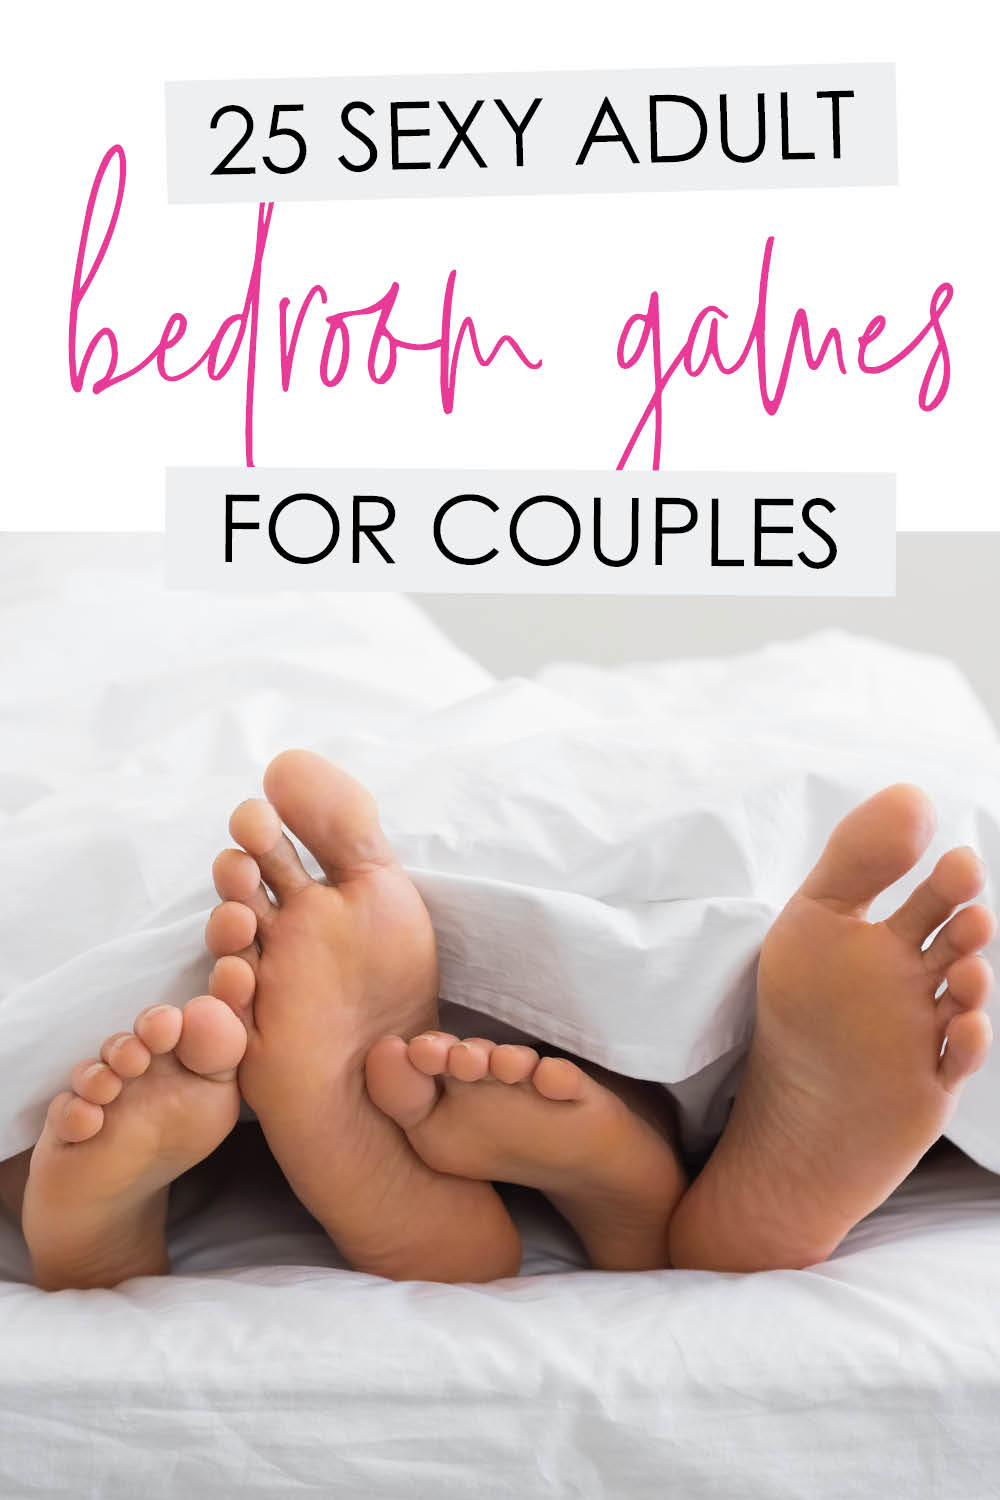 Adult games for couples